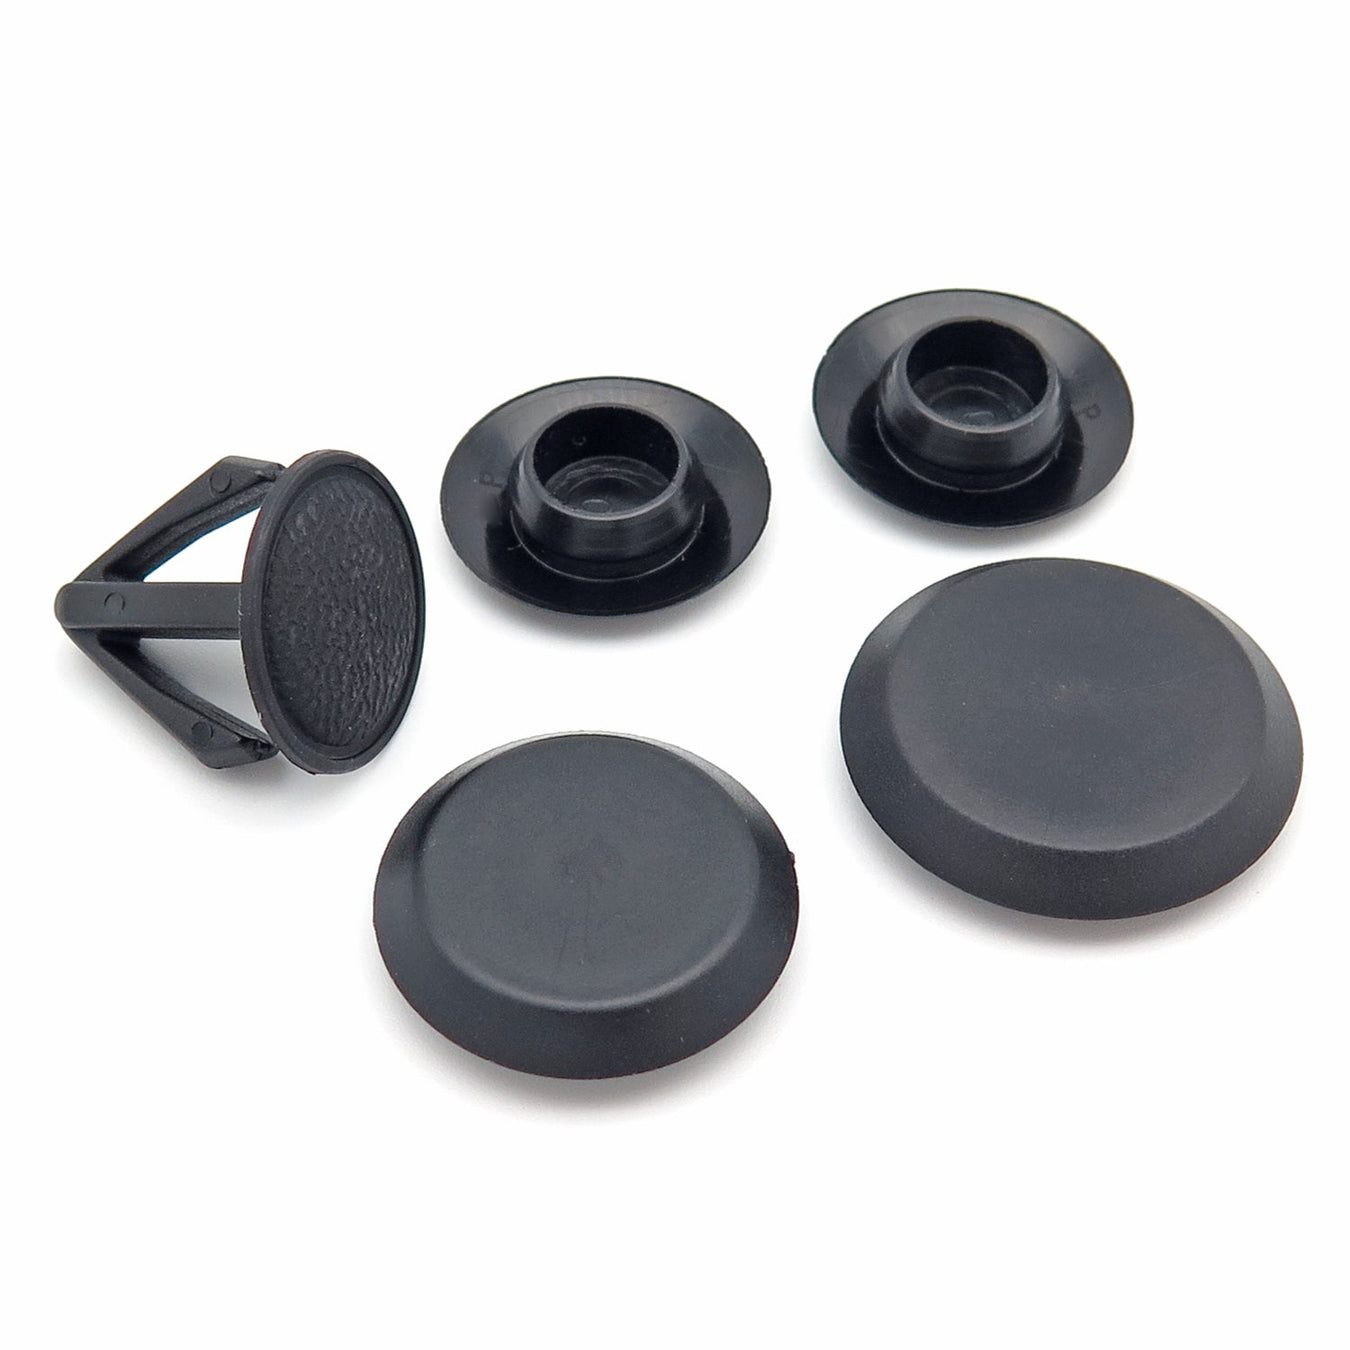 Blanking Plugs / Grommets - VehicleClips